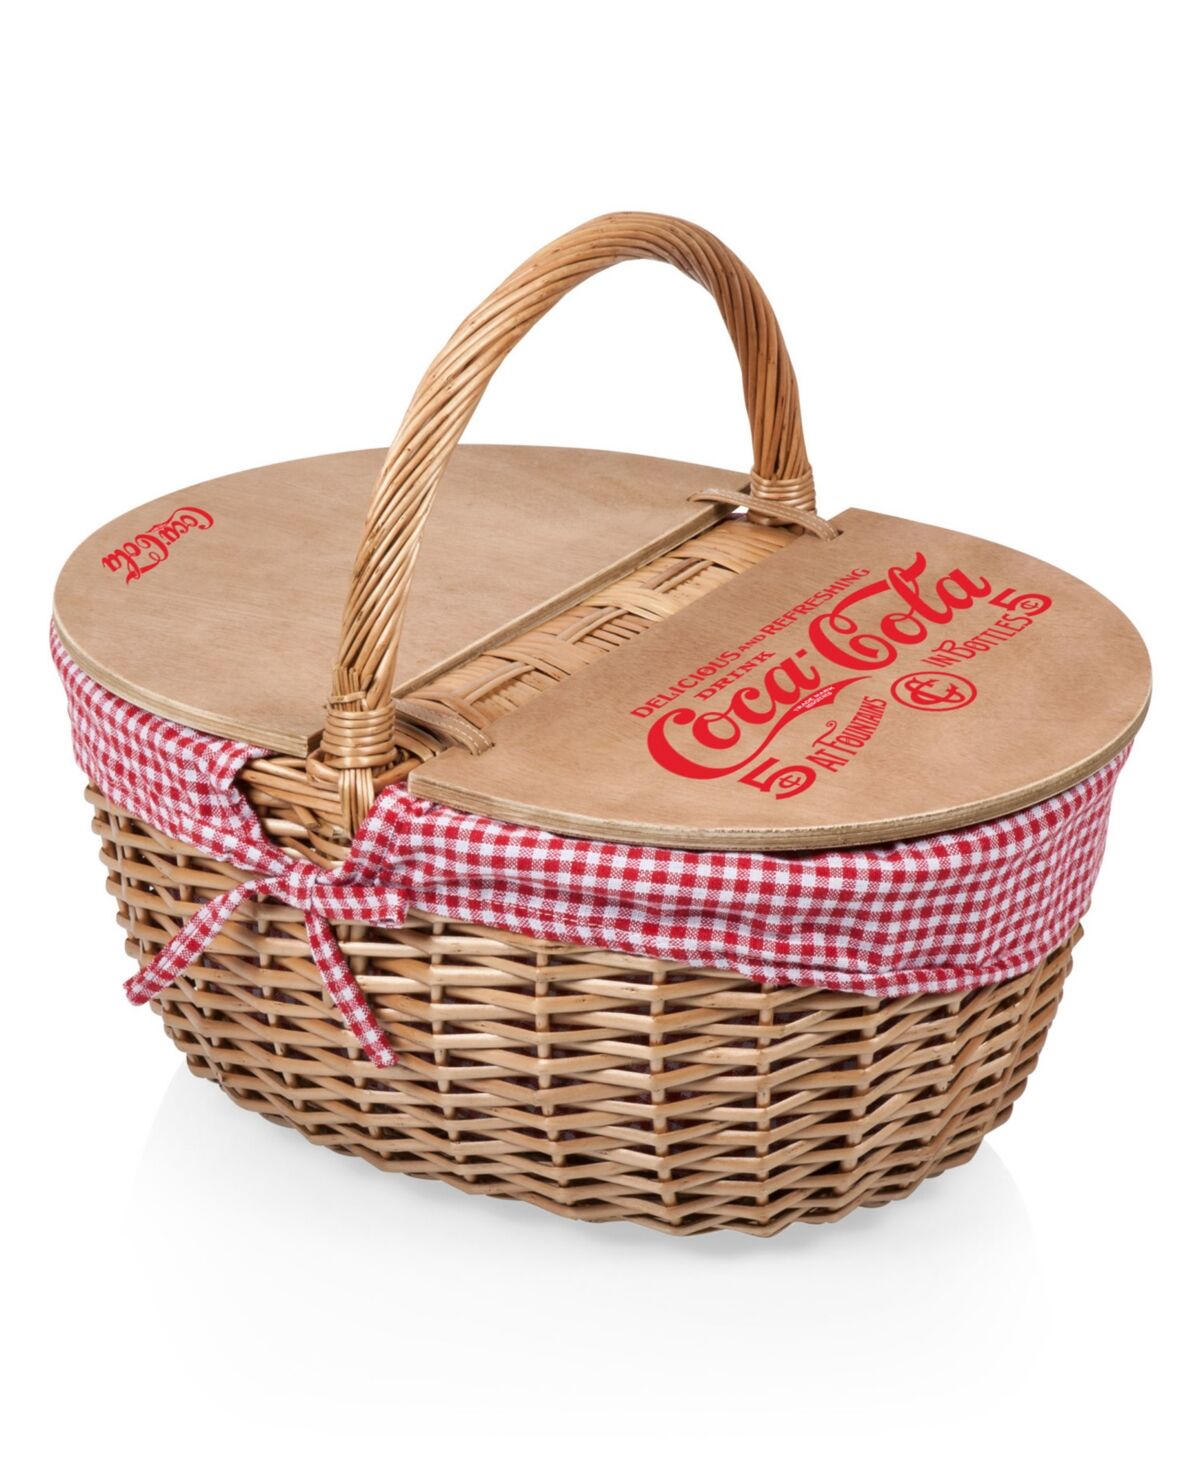 Picnic Time Coca-Cola Country Picnic Basket - Red White Gingham Pattern